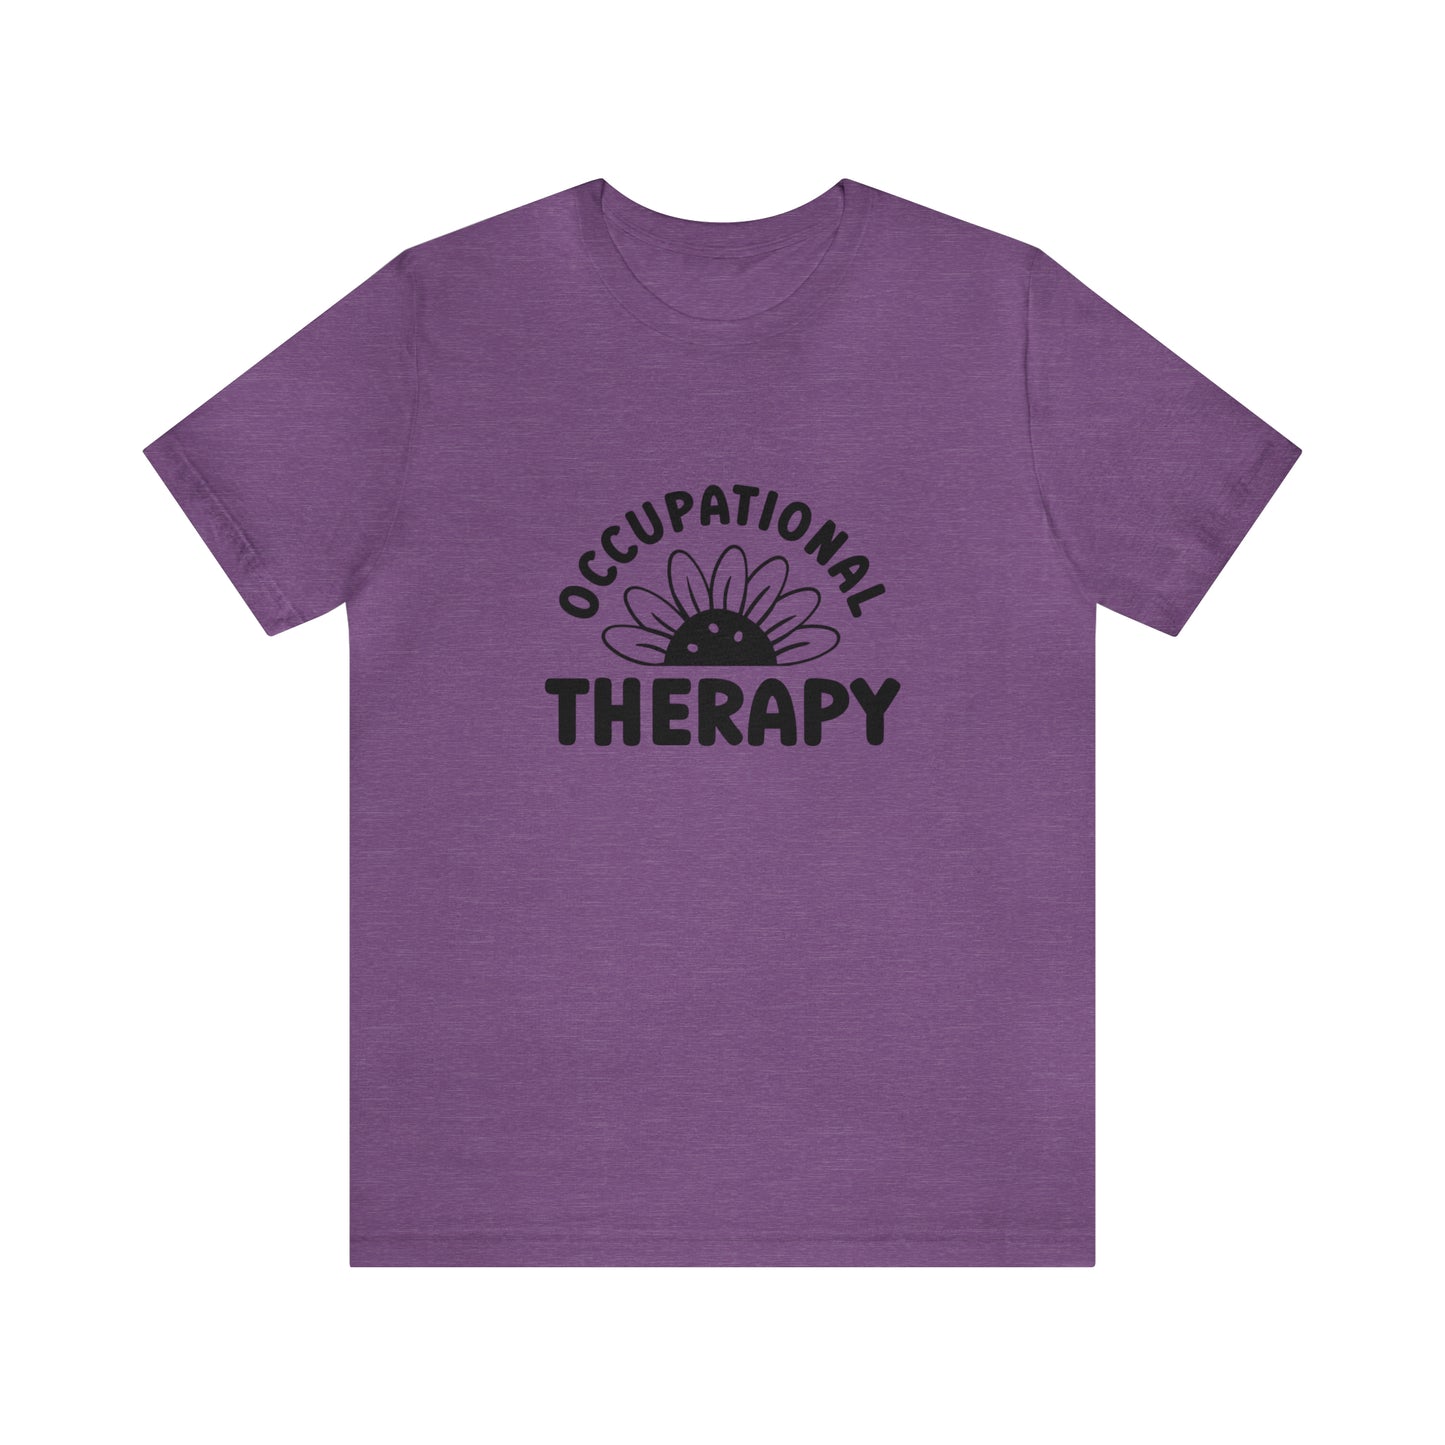 Occupational Therapy Short Sleeve Women's Tee